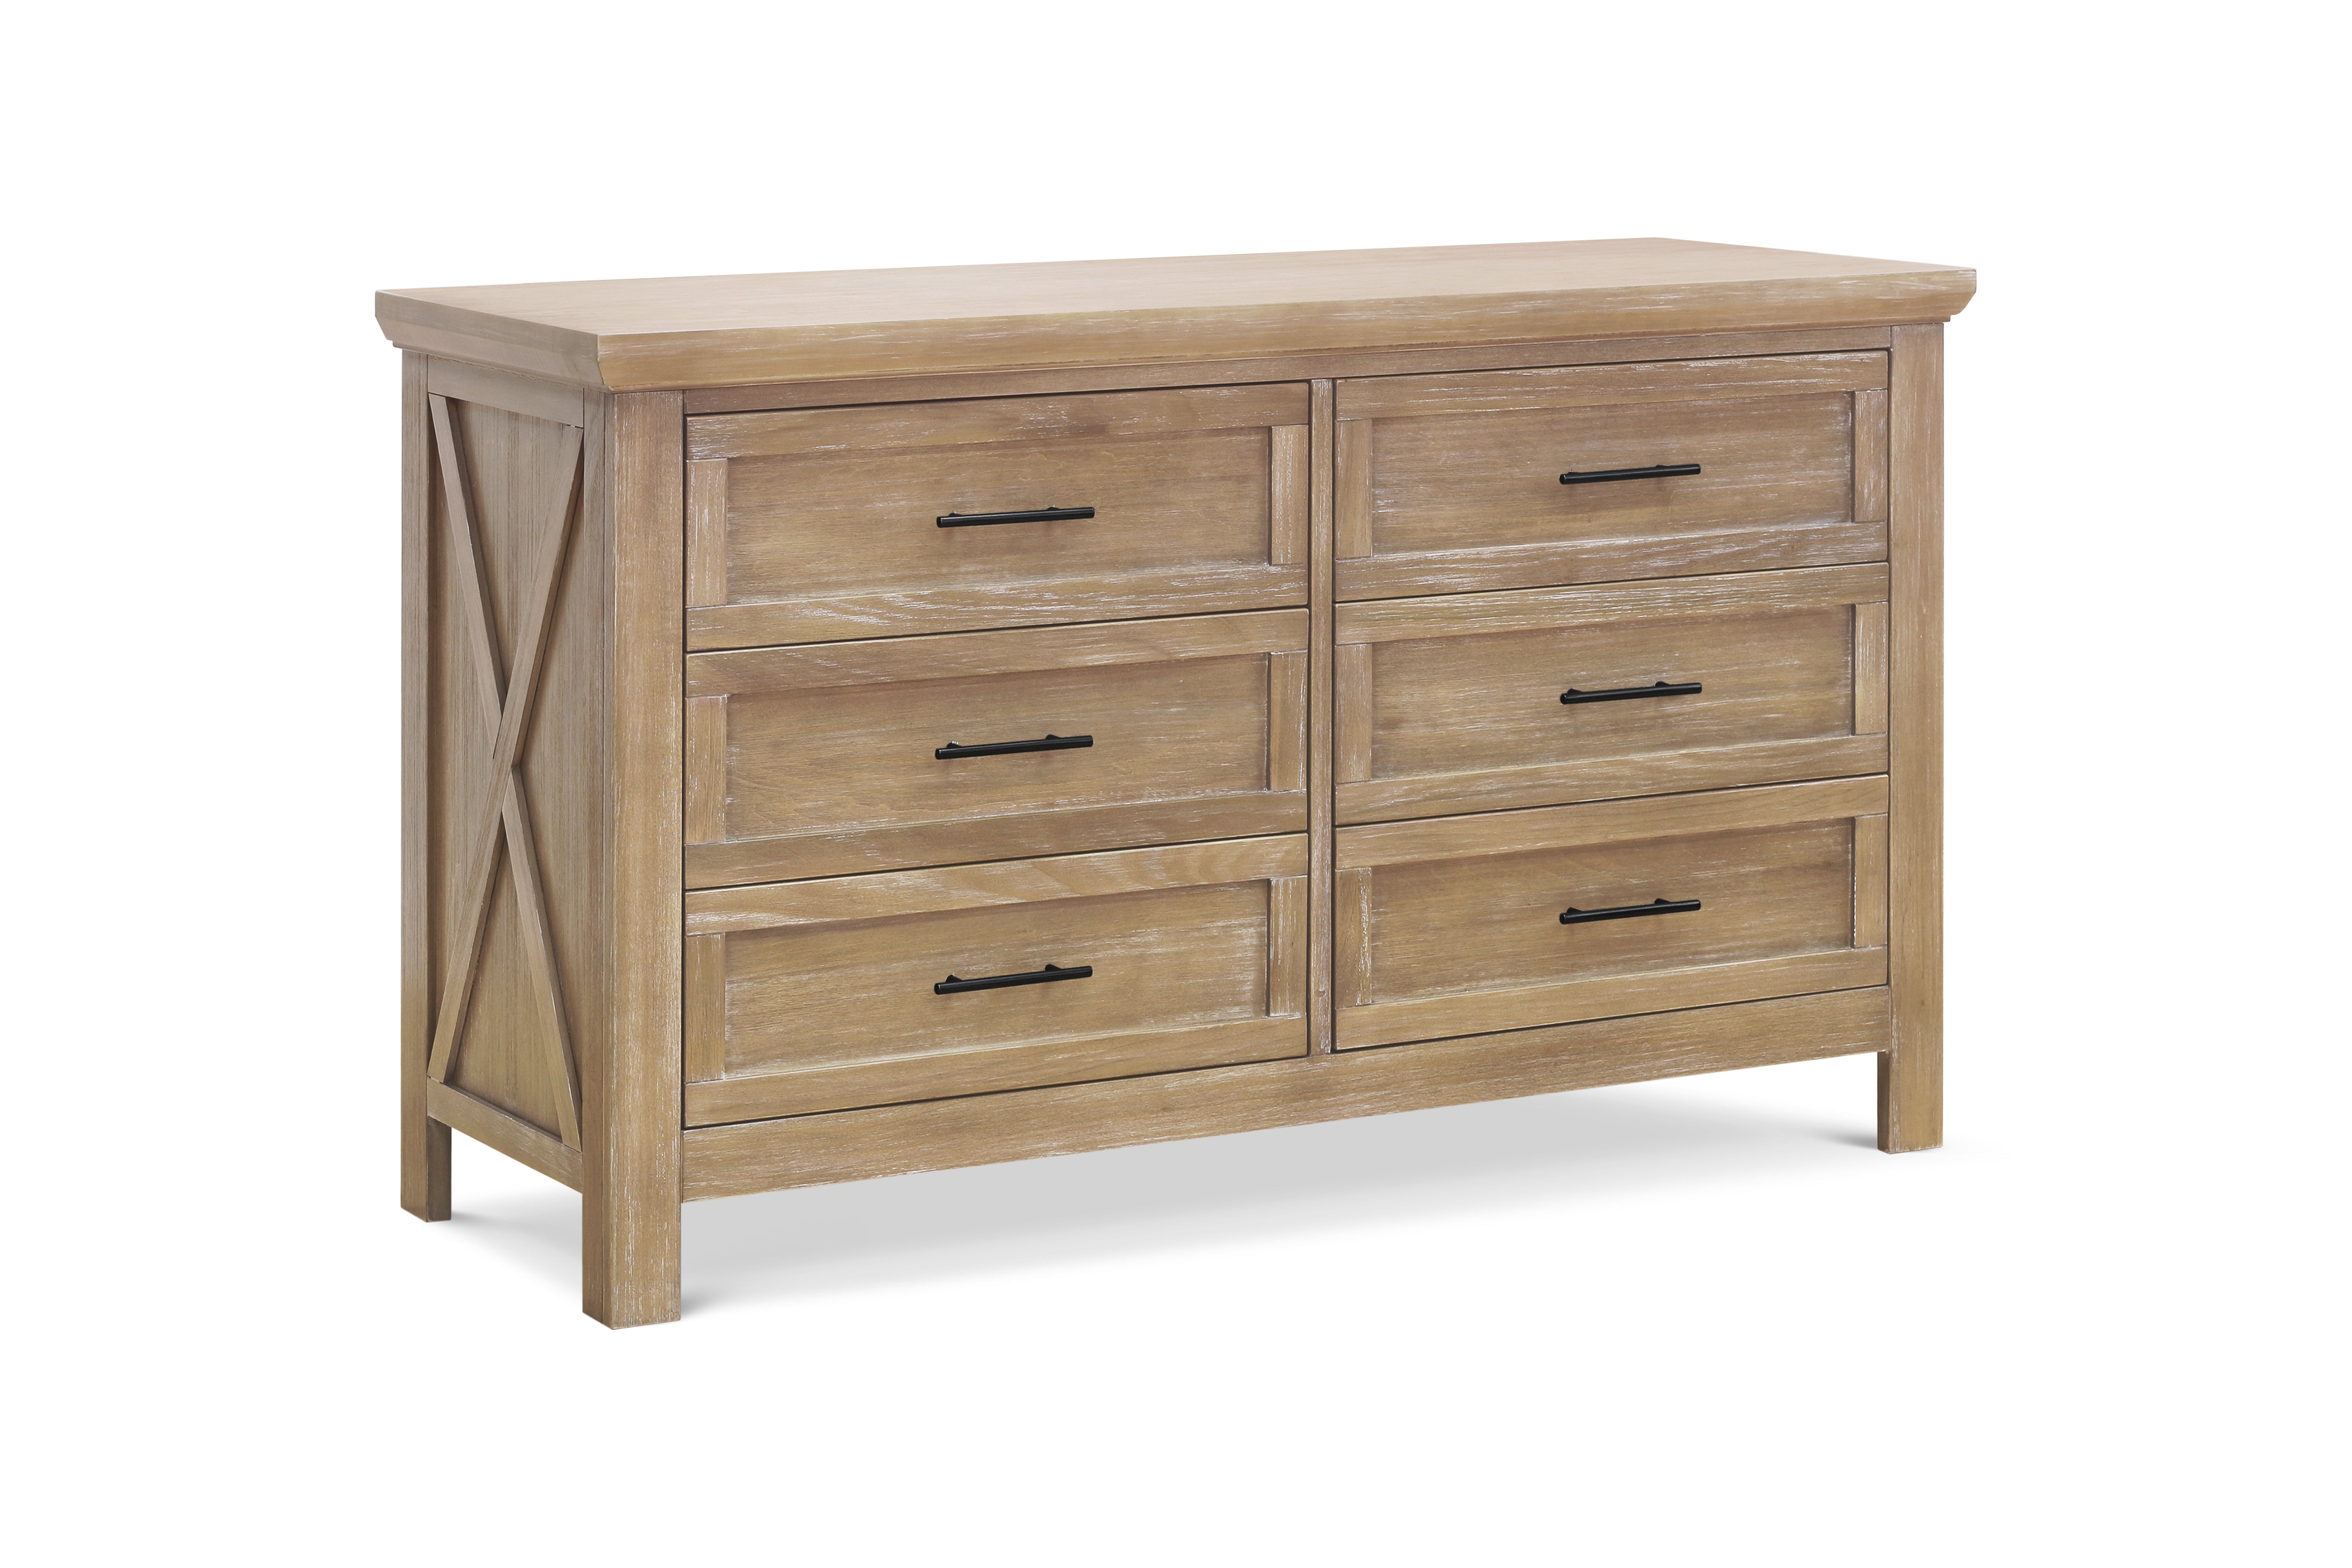 Emory double dresser in driftwood 